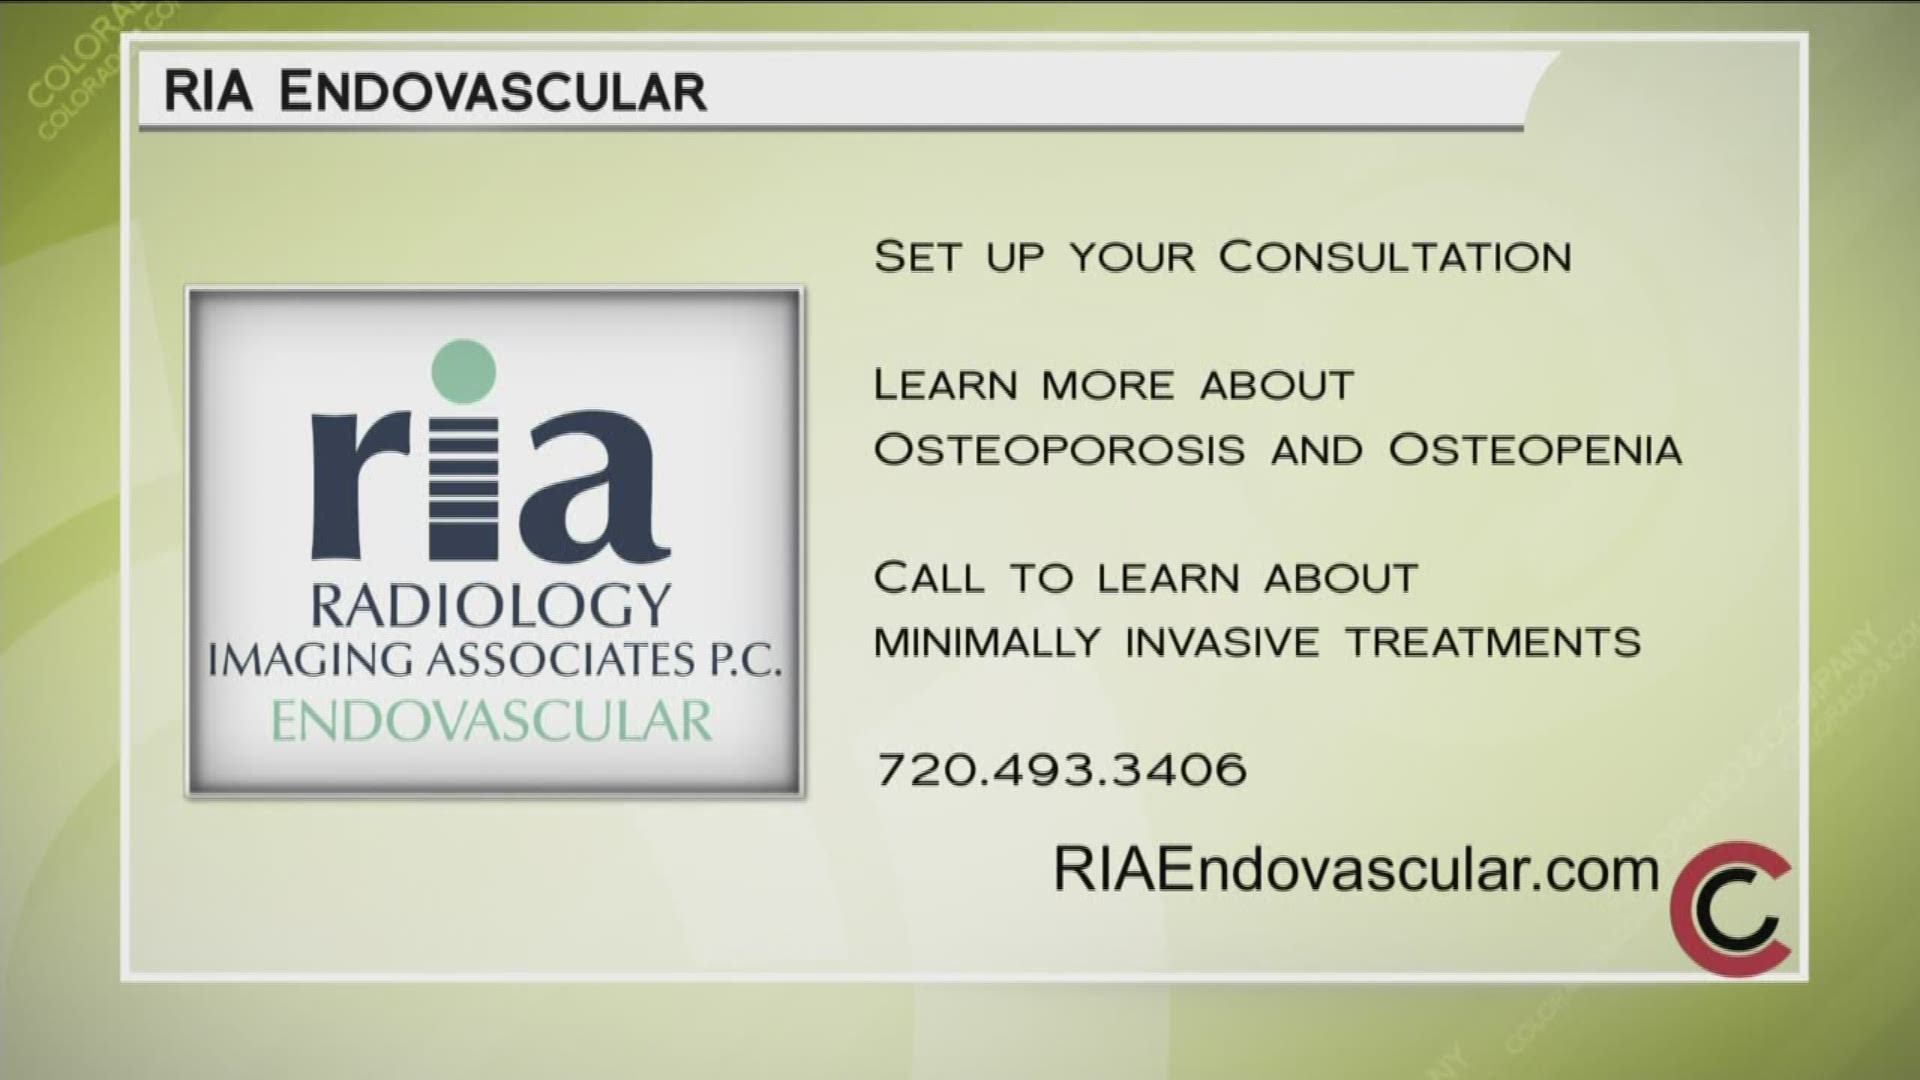 If you feel like you're suffering from any of the symptoms talked about in this segment, call 720.493.3406 or visit RIAEndovascular.com to see how they can help.